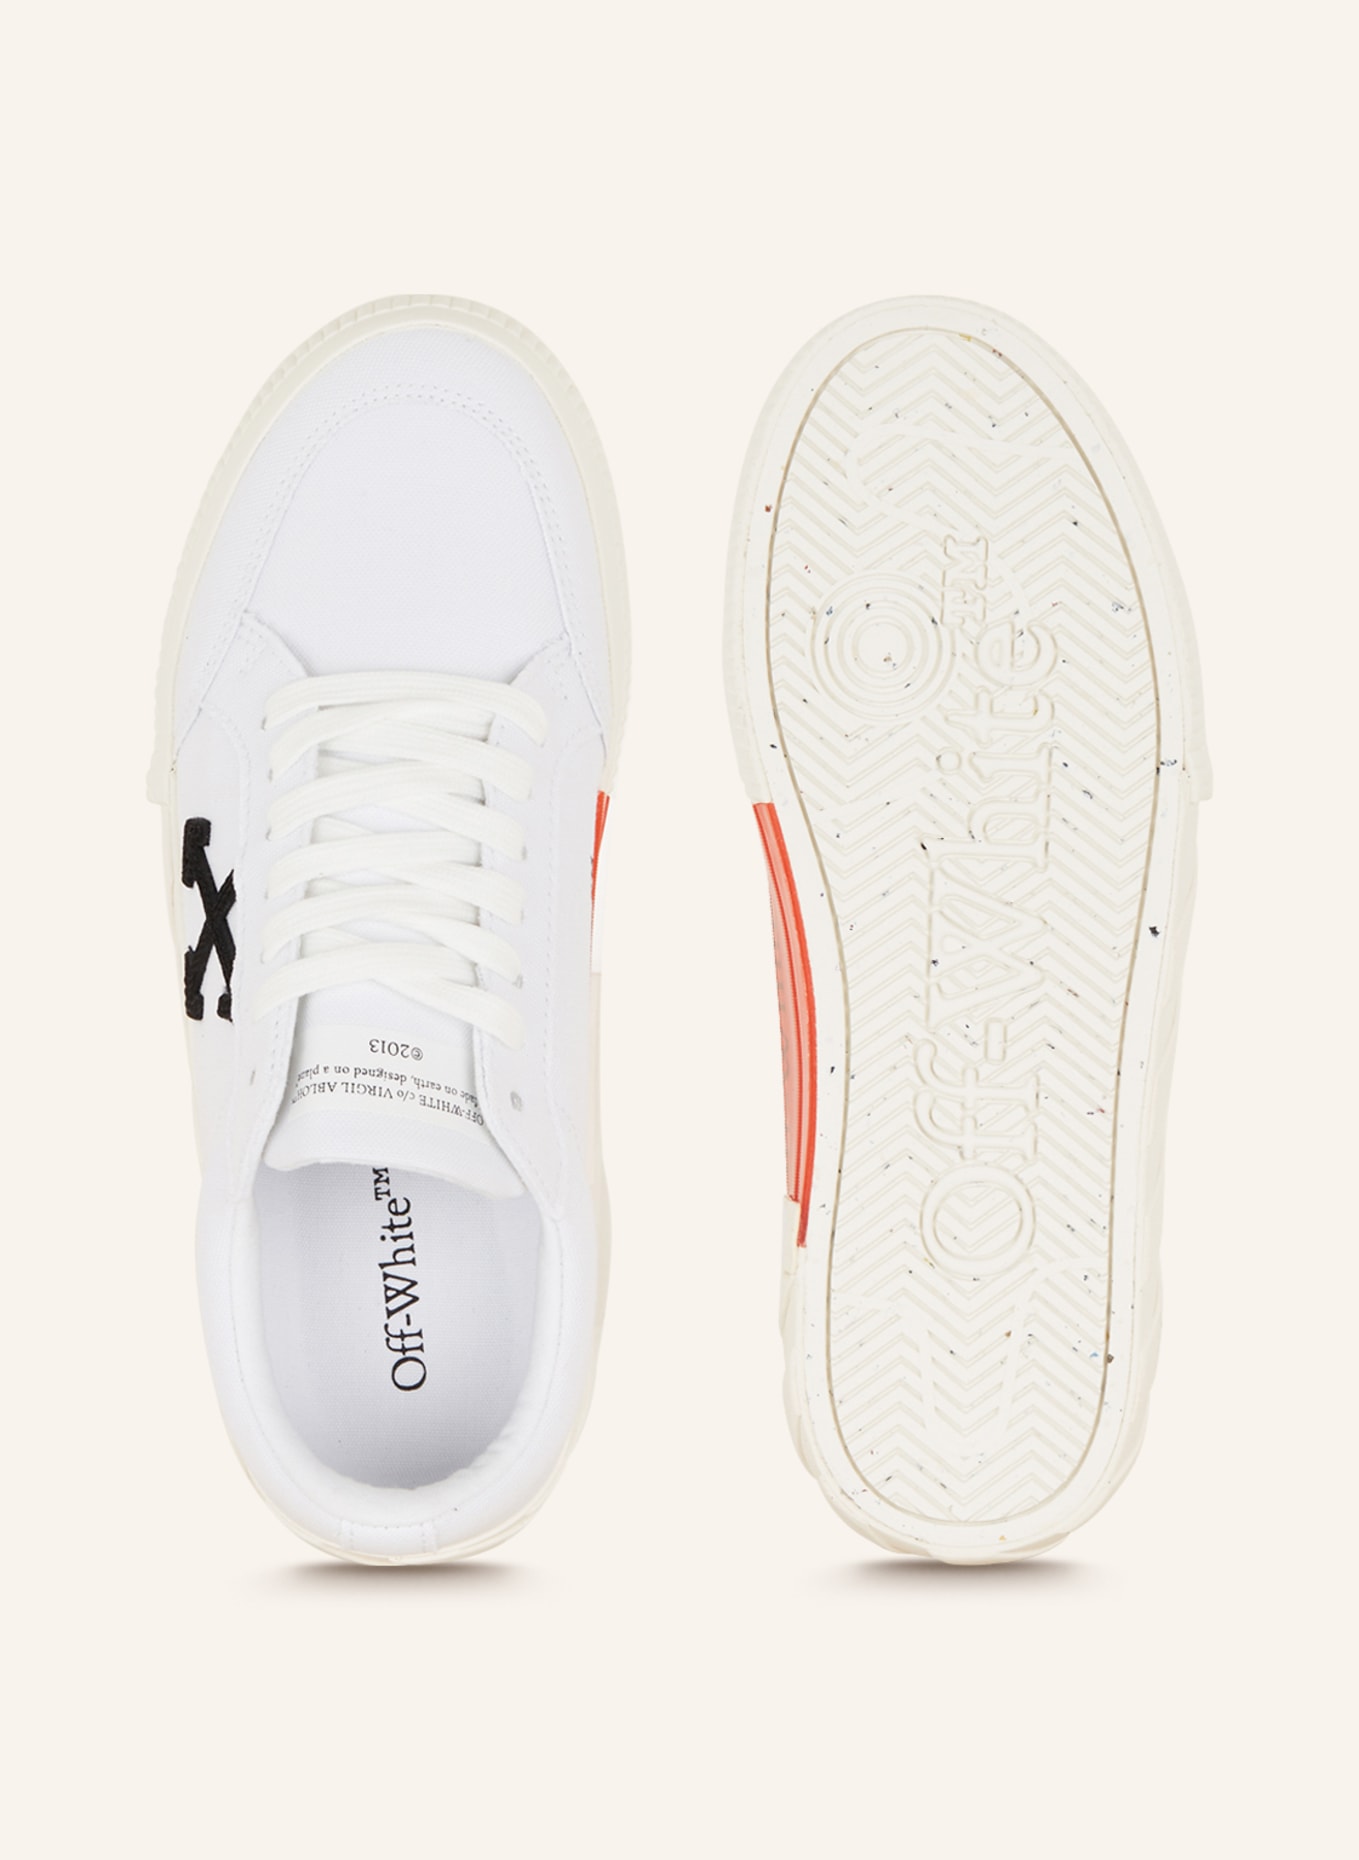 Off-White Sneakers in white/ black